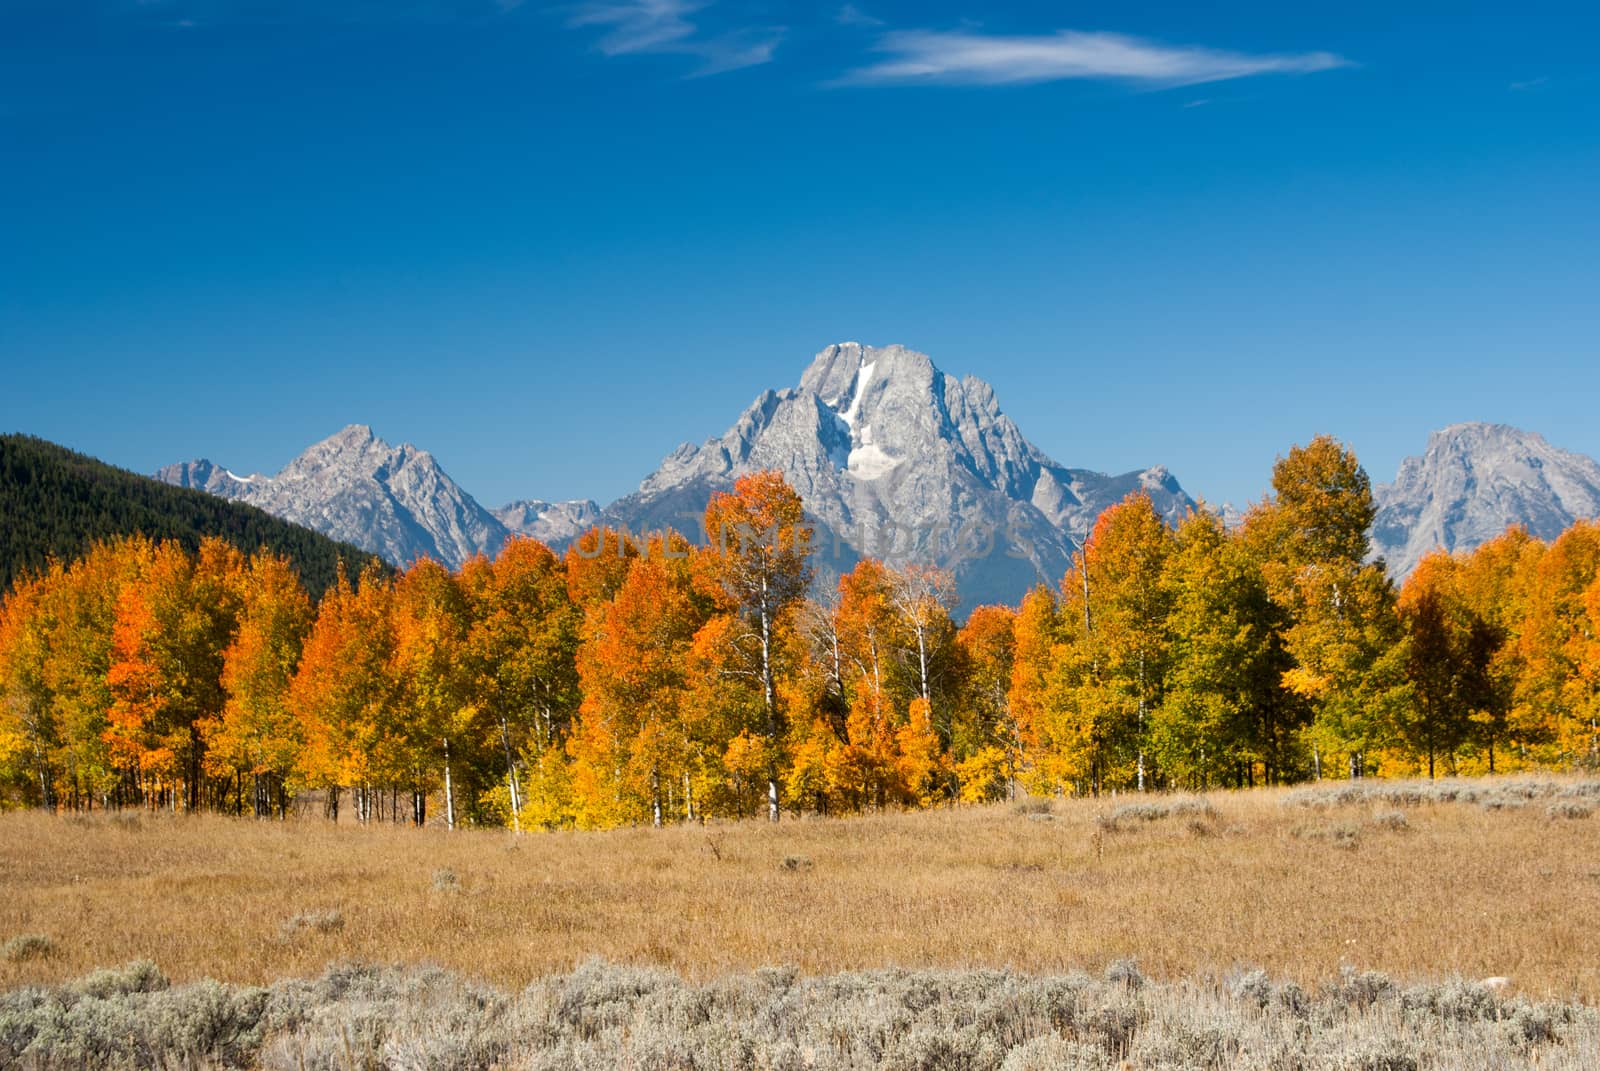 Snow capped Grand Tetons in Fall